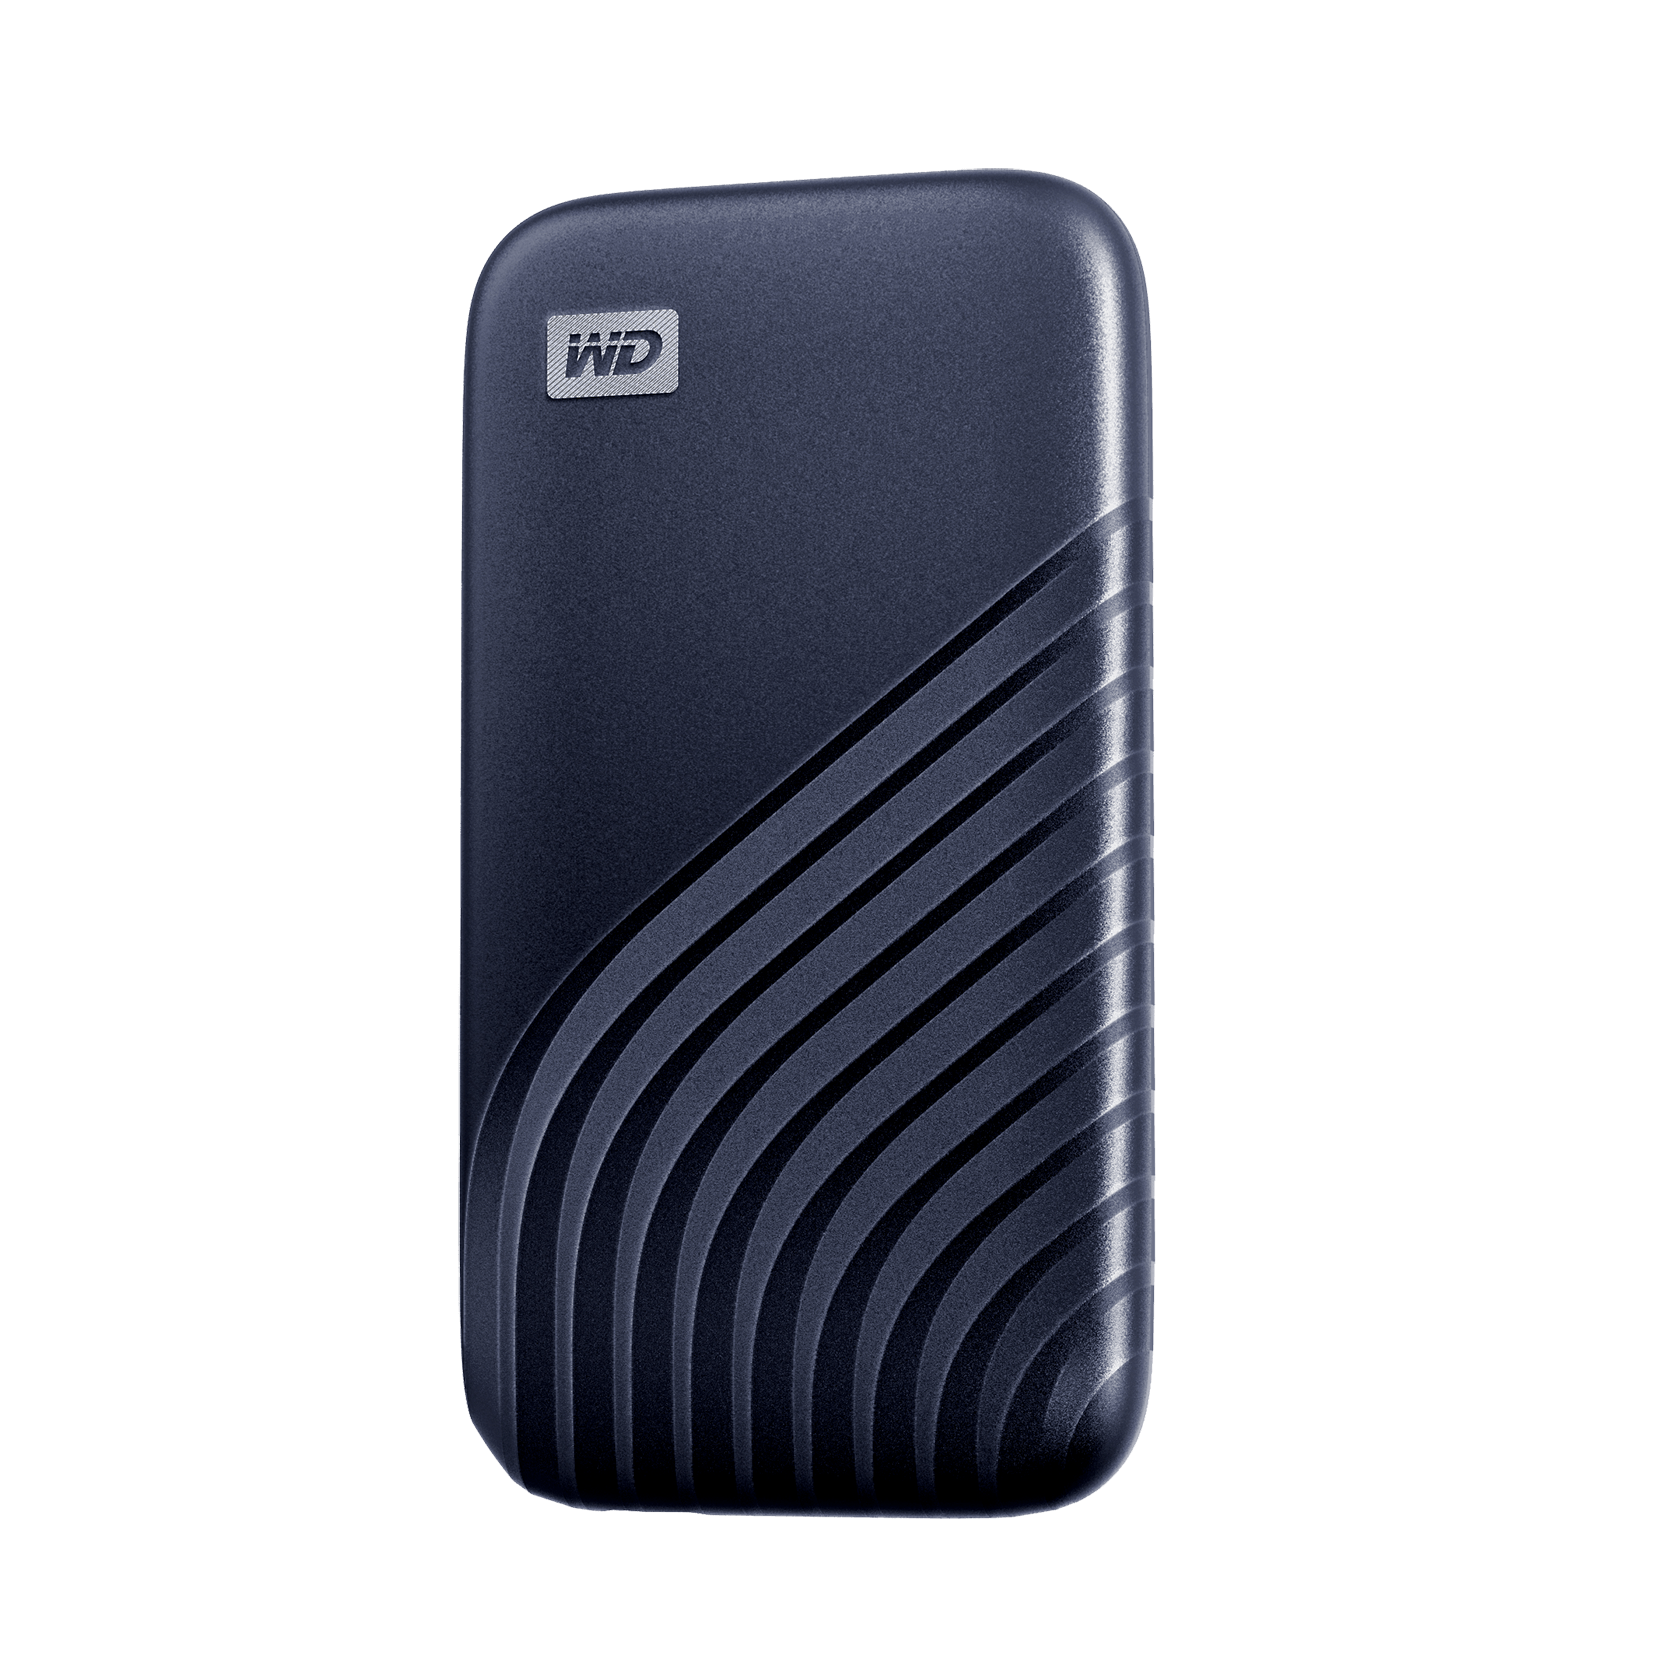 WD 1TB My Passport SSD, Portable External Solid State Drive, Blue - WDBAGF0010BBL-WESN - image 3 of 8